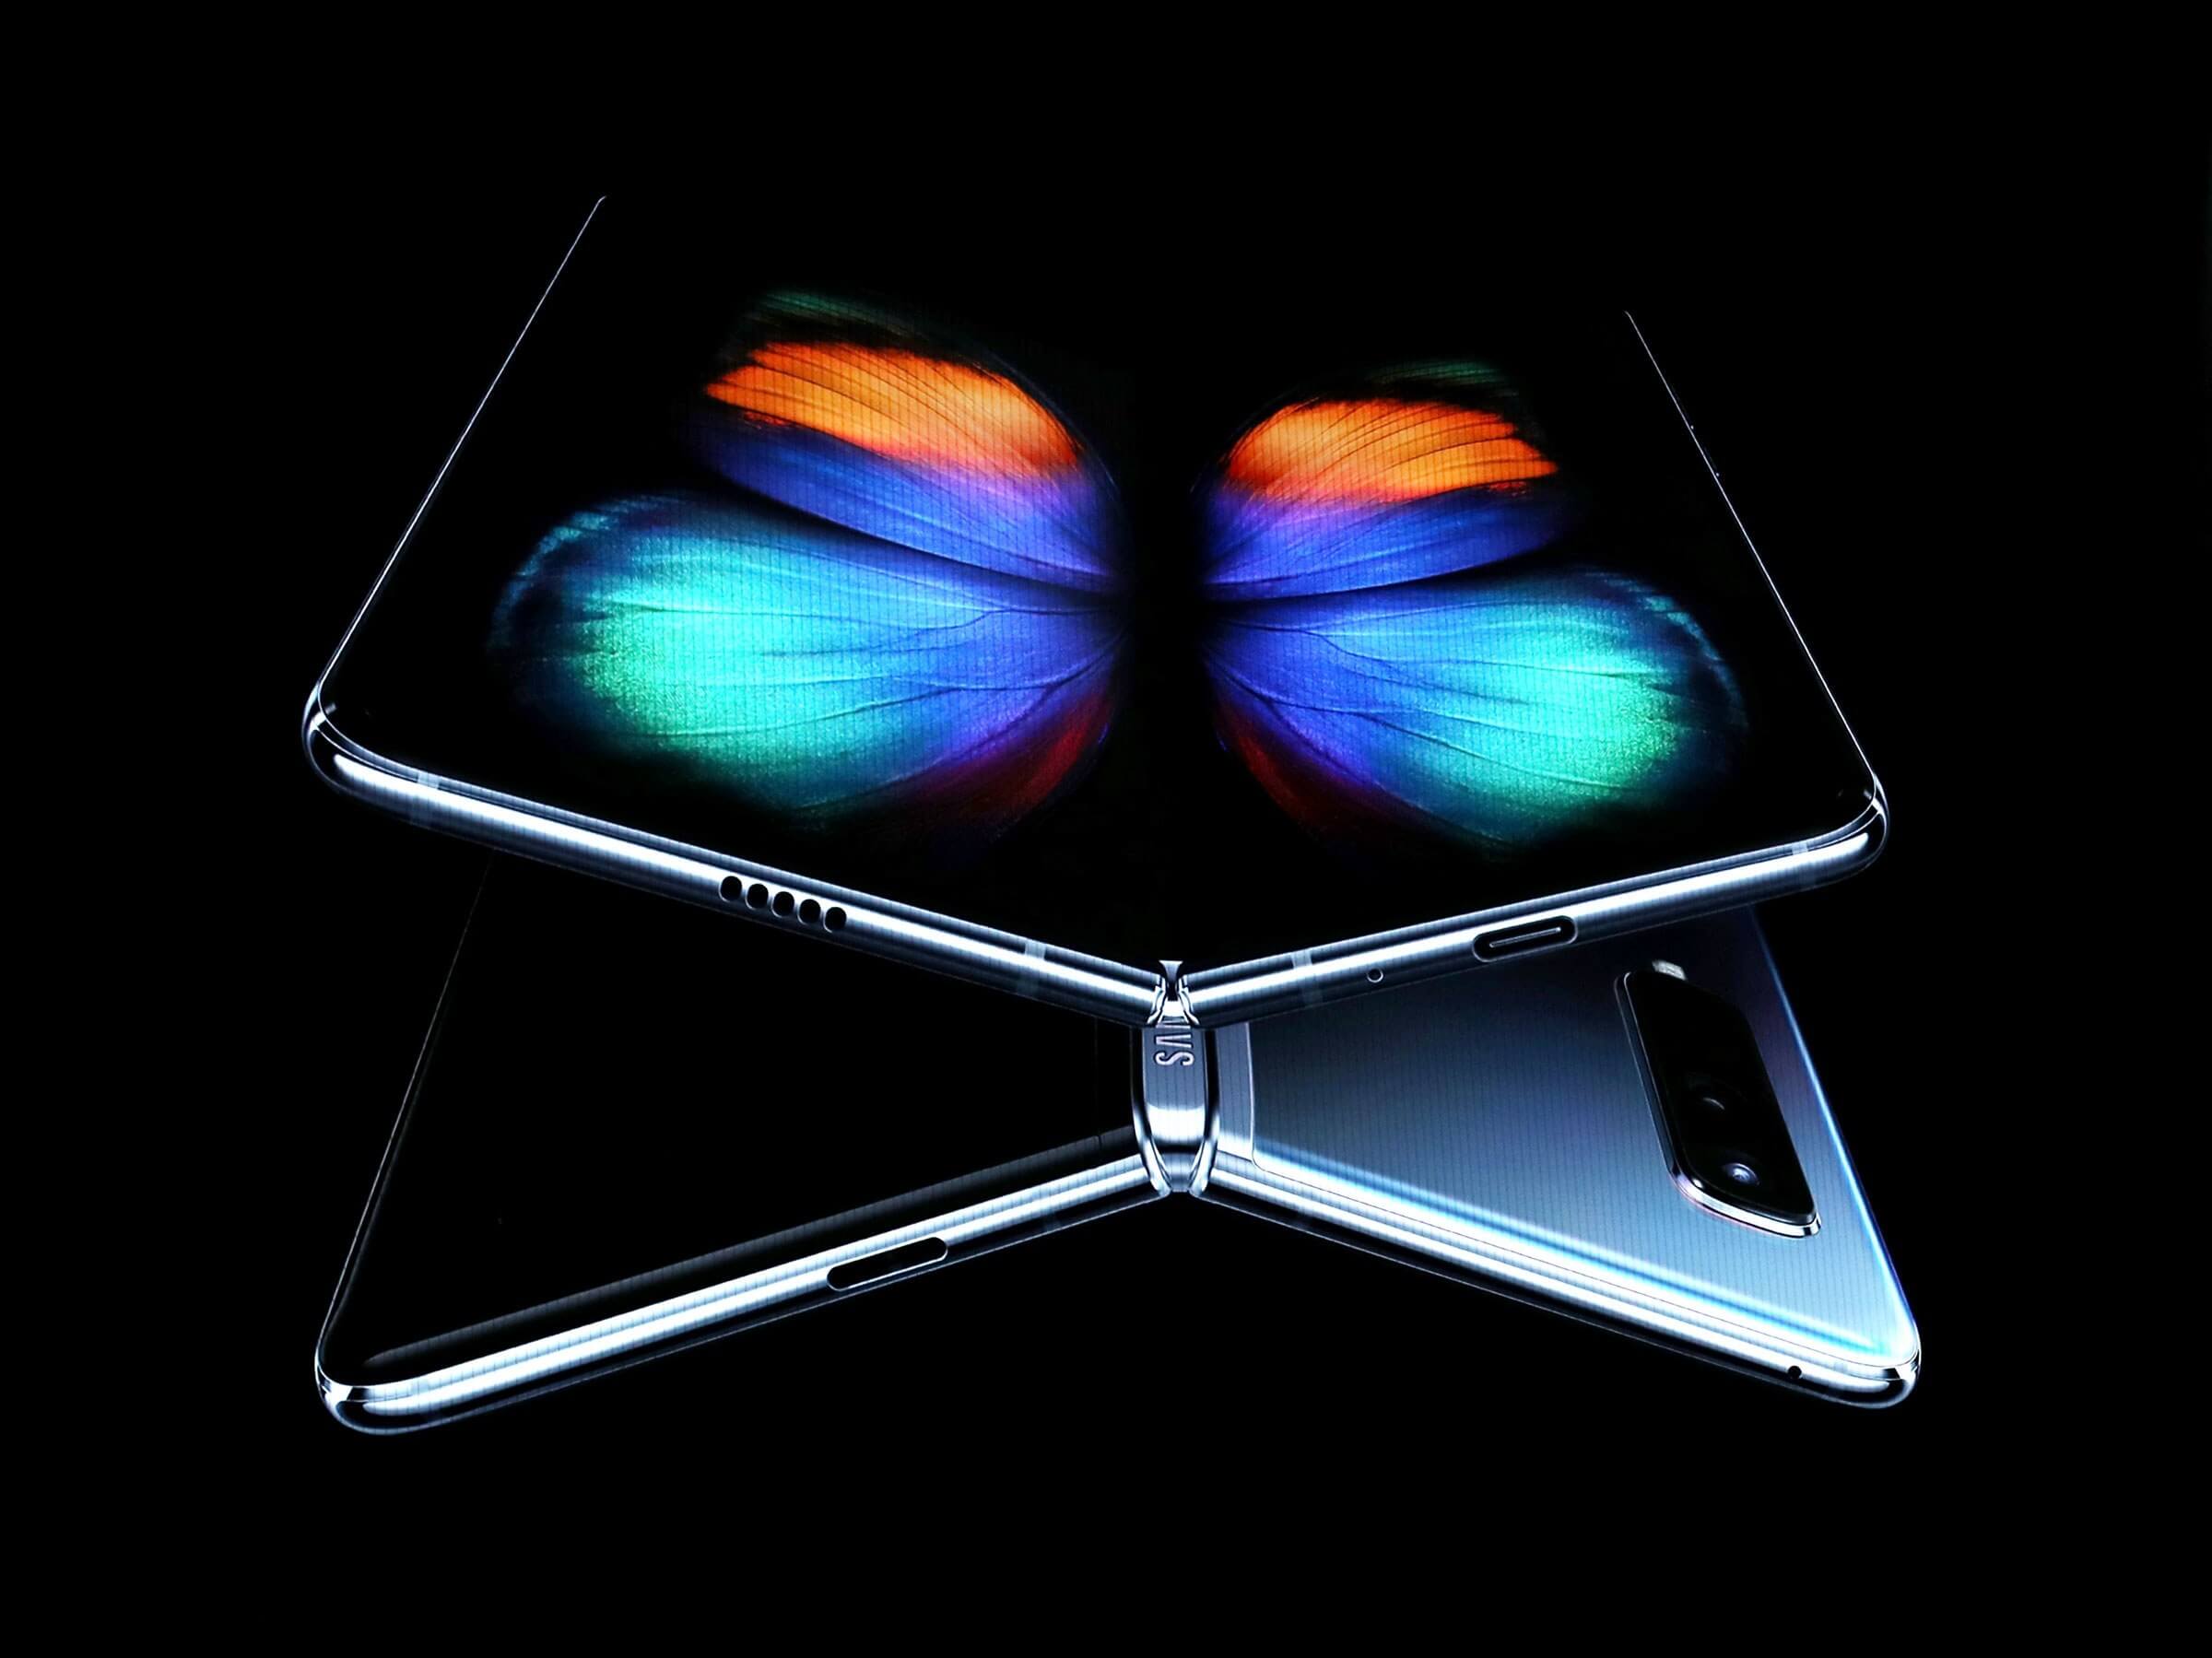 Samsung robots subjected the Galaxy Fold to 200,000 folds